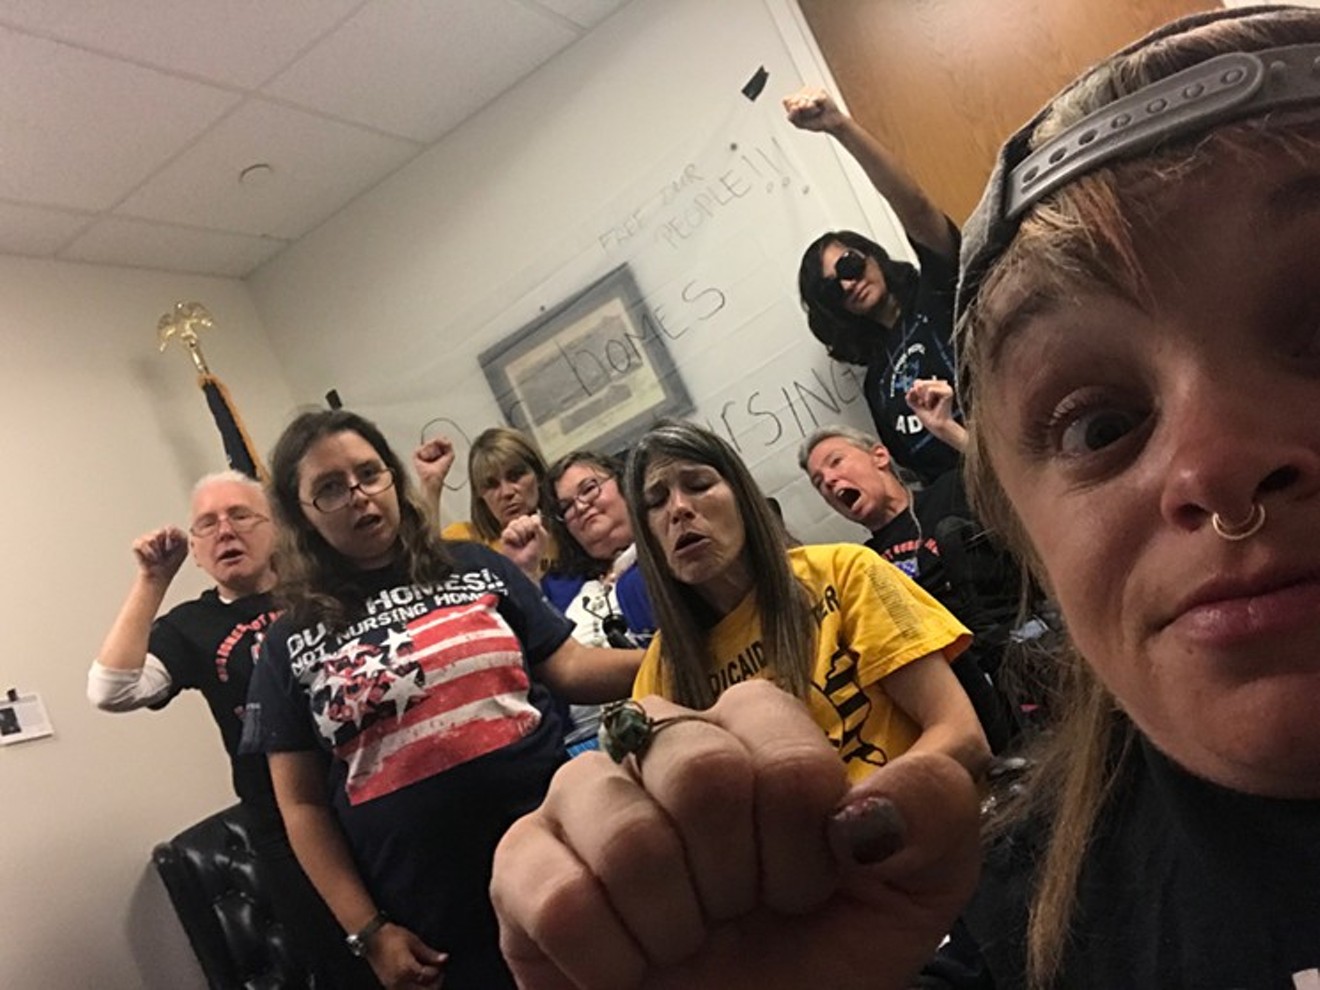 Kalyn Heffernan (right) and other ADAPT protesters at Cory Gardner's office.